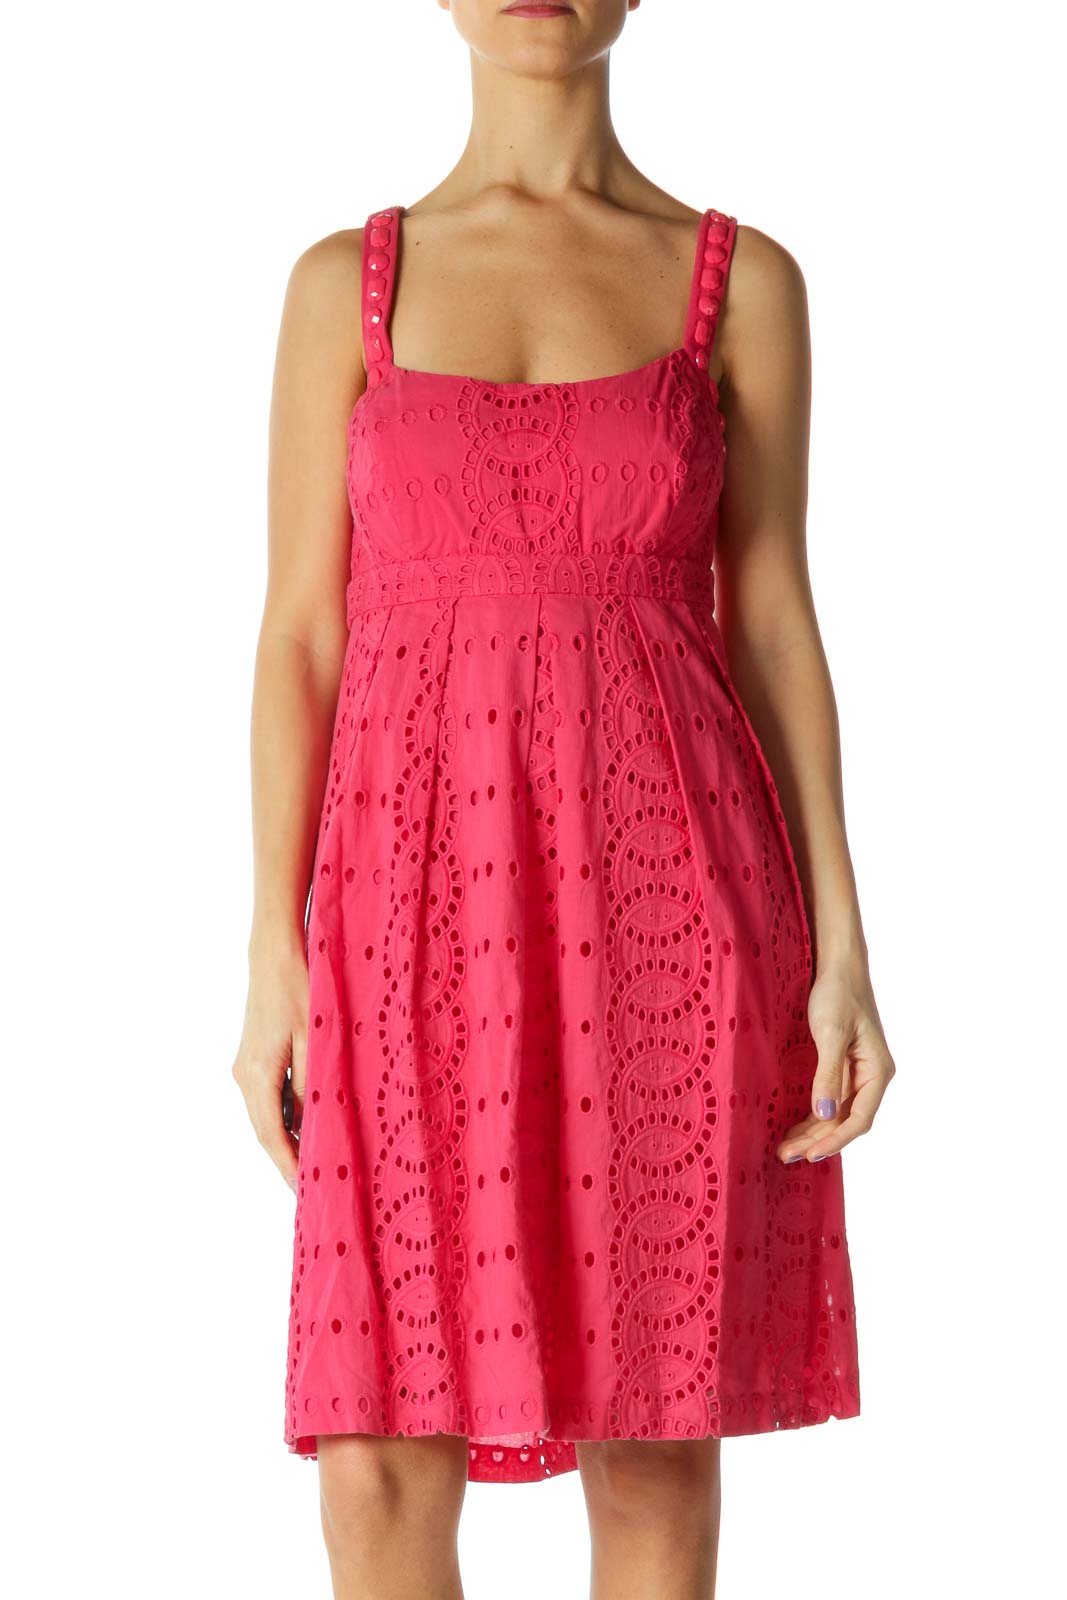 Pink Lace Casual A-Line Dress Front